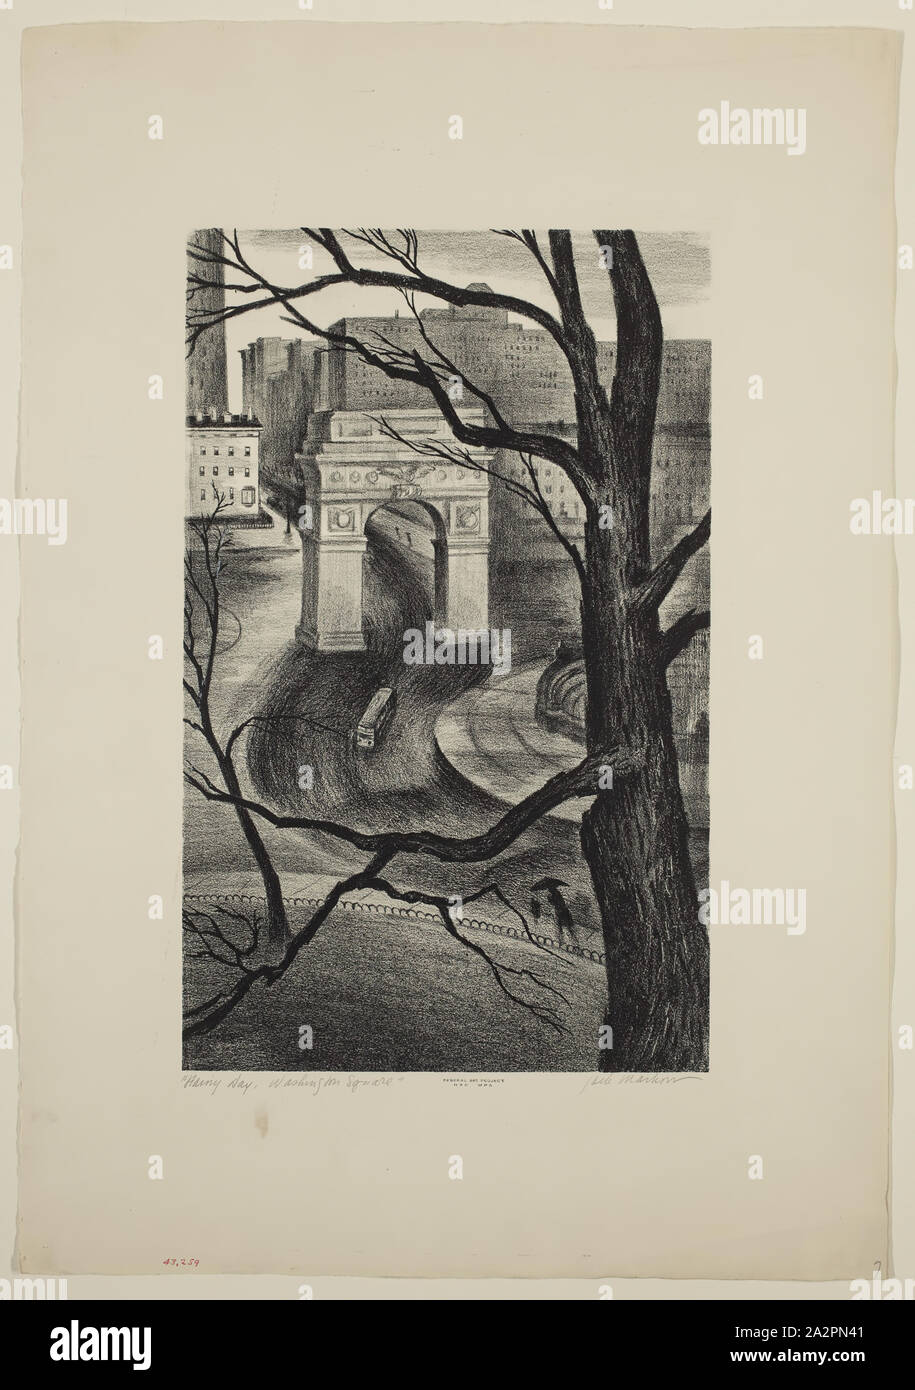 Jack Markow, American, 1905-1983, Rainy Day, Washington Square, ca. 1938, lithograph printed in black ink on wove paper, Image: 15 3/8 × 9 5/8 inches (39.1 × 24.4 cm Stock Photo